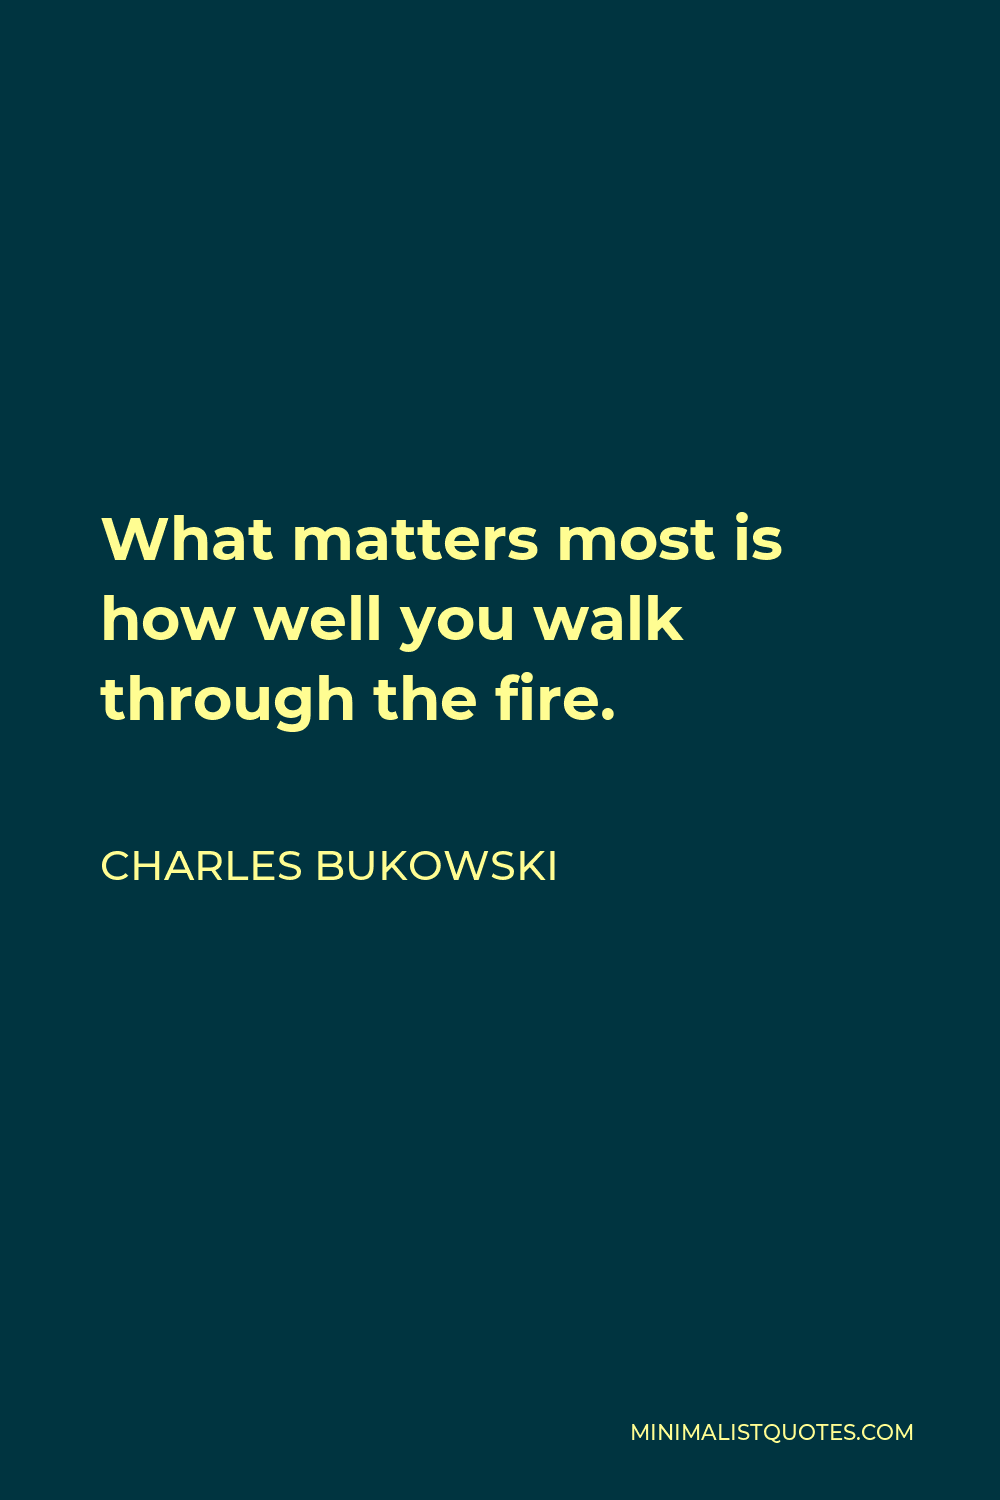 Charles Bukowski Quote: What matters most is how well you walk through the  fire.